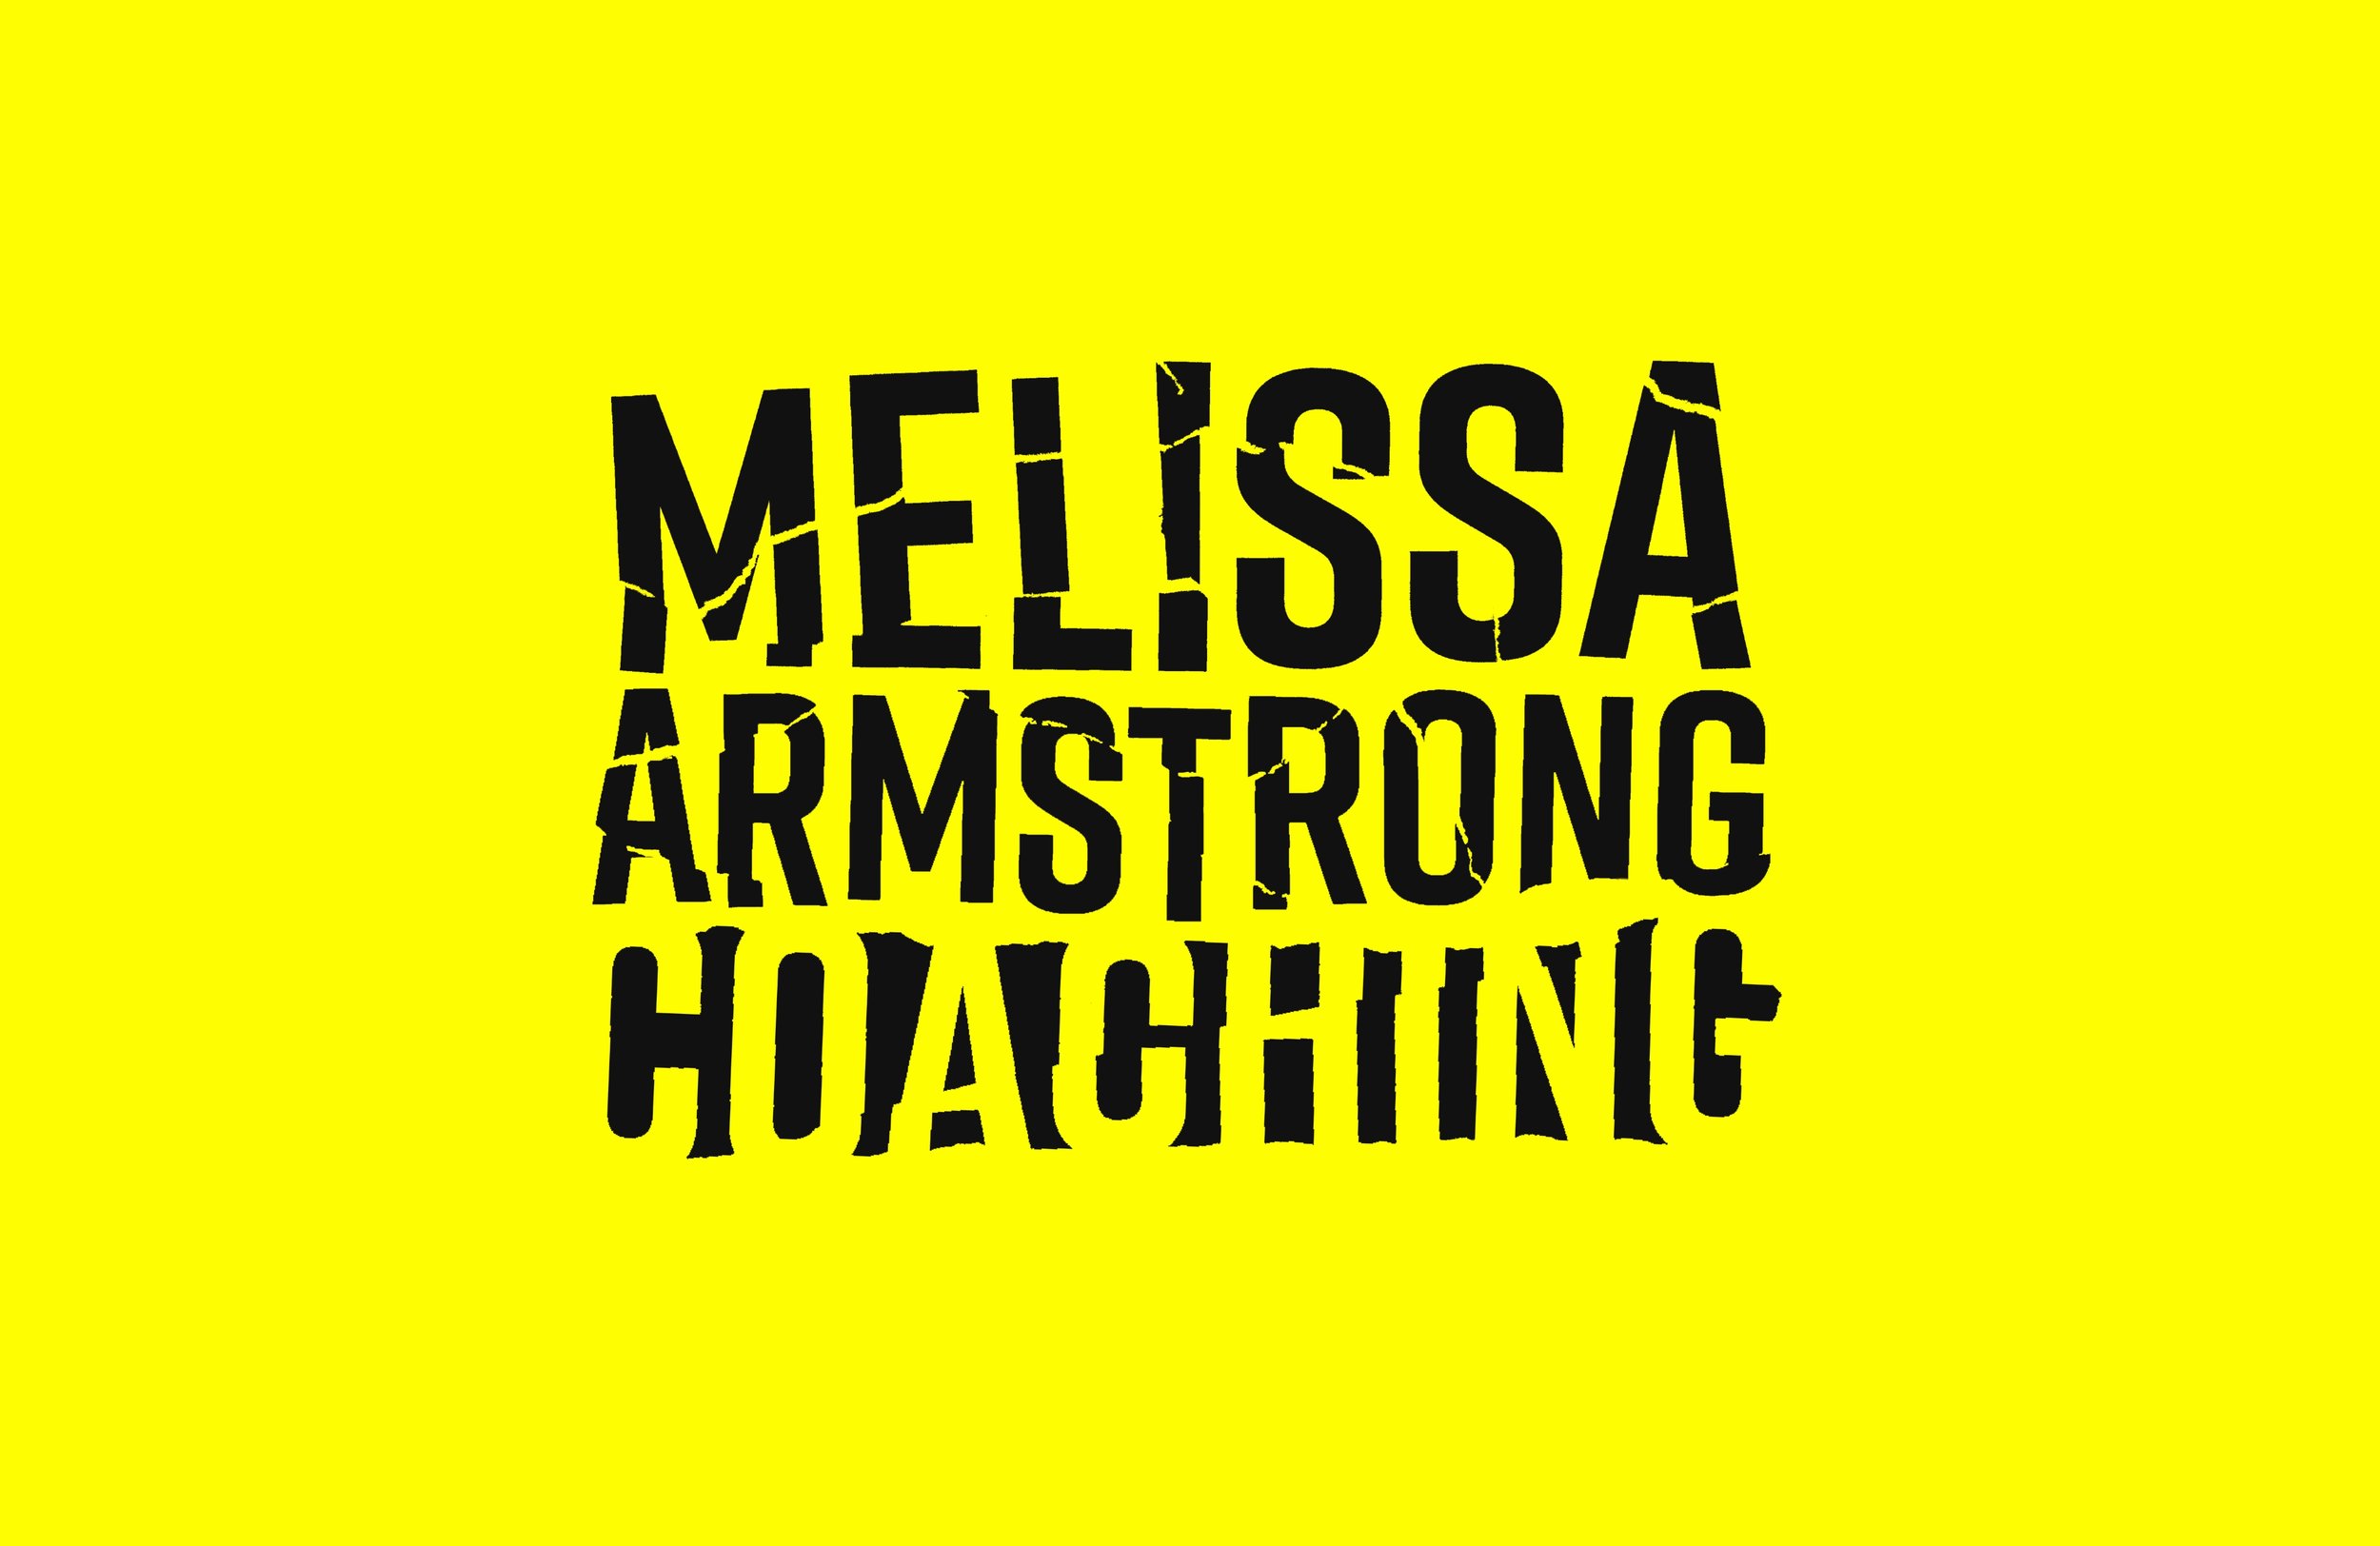 Distressed typographic logo design for Melissa Armstrong Coaching against a bright yellow background.